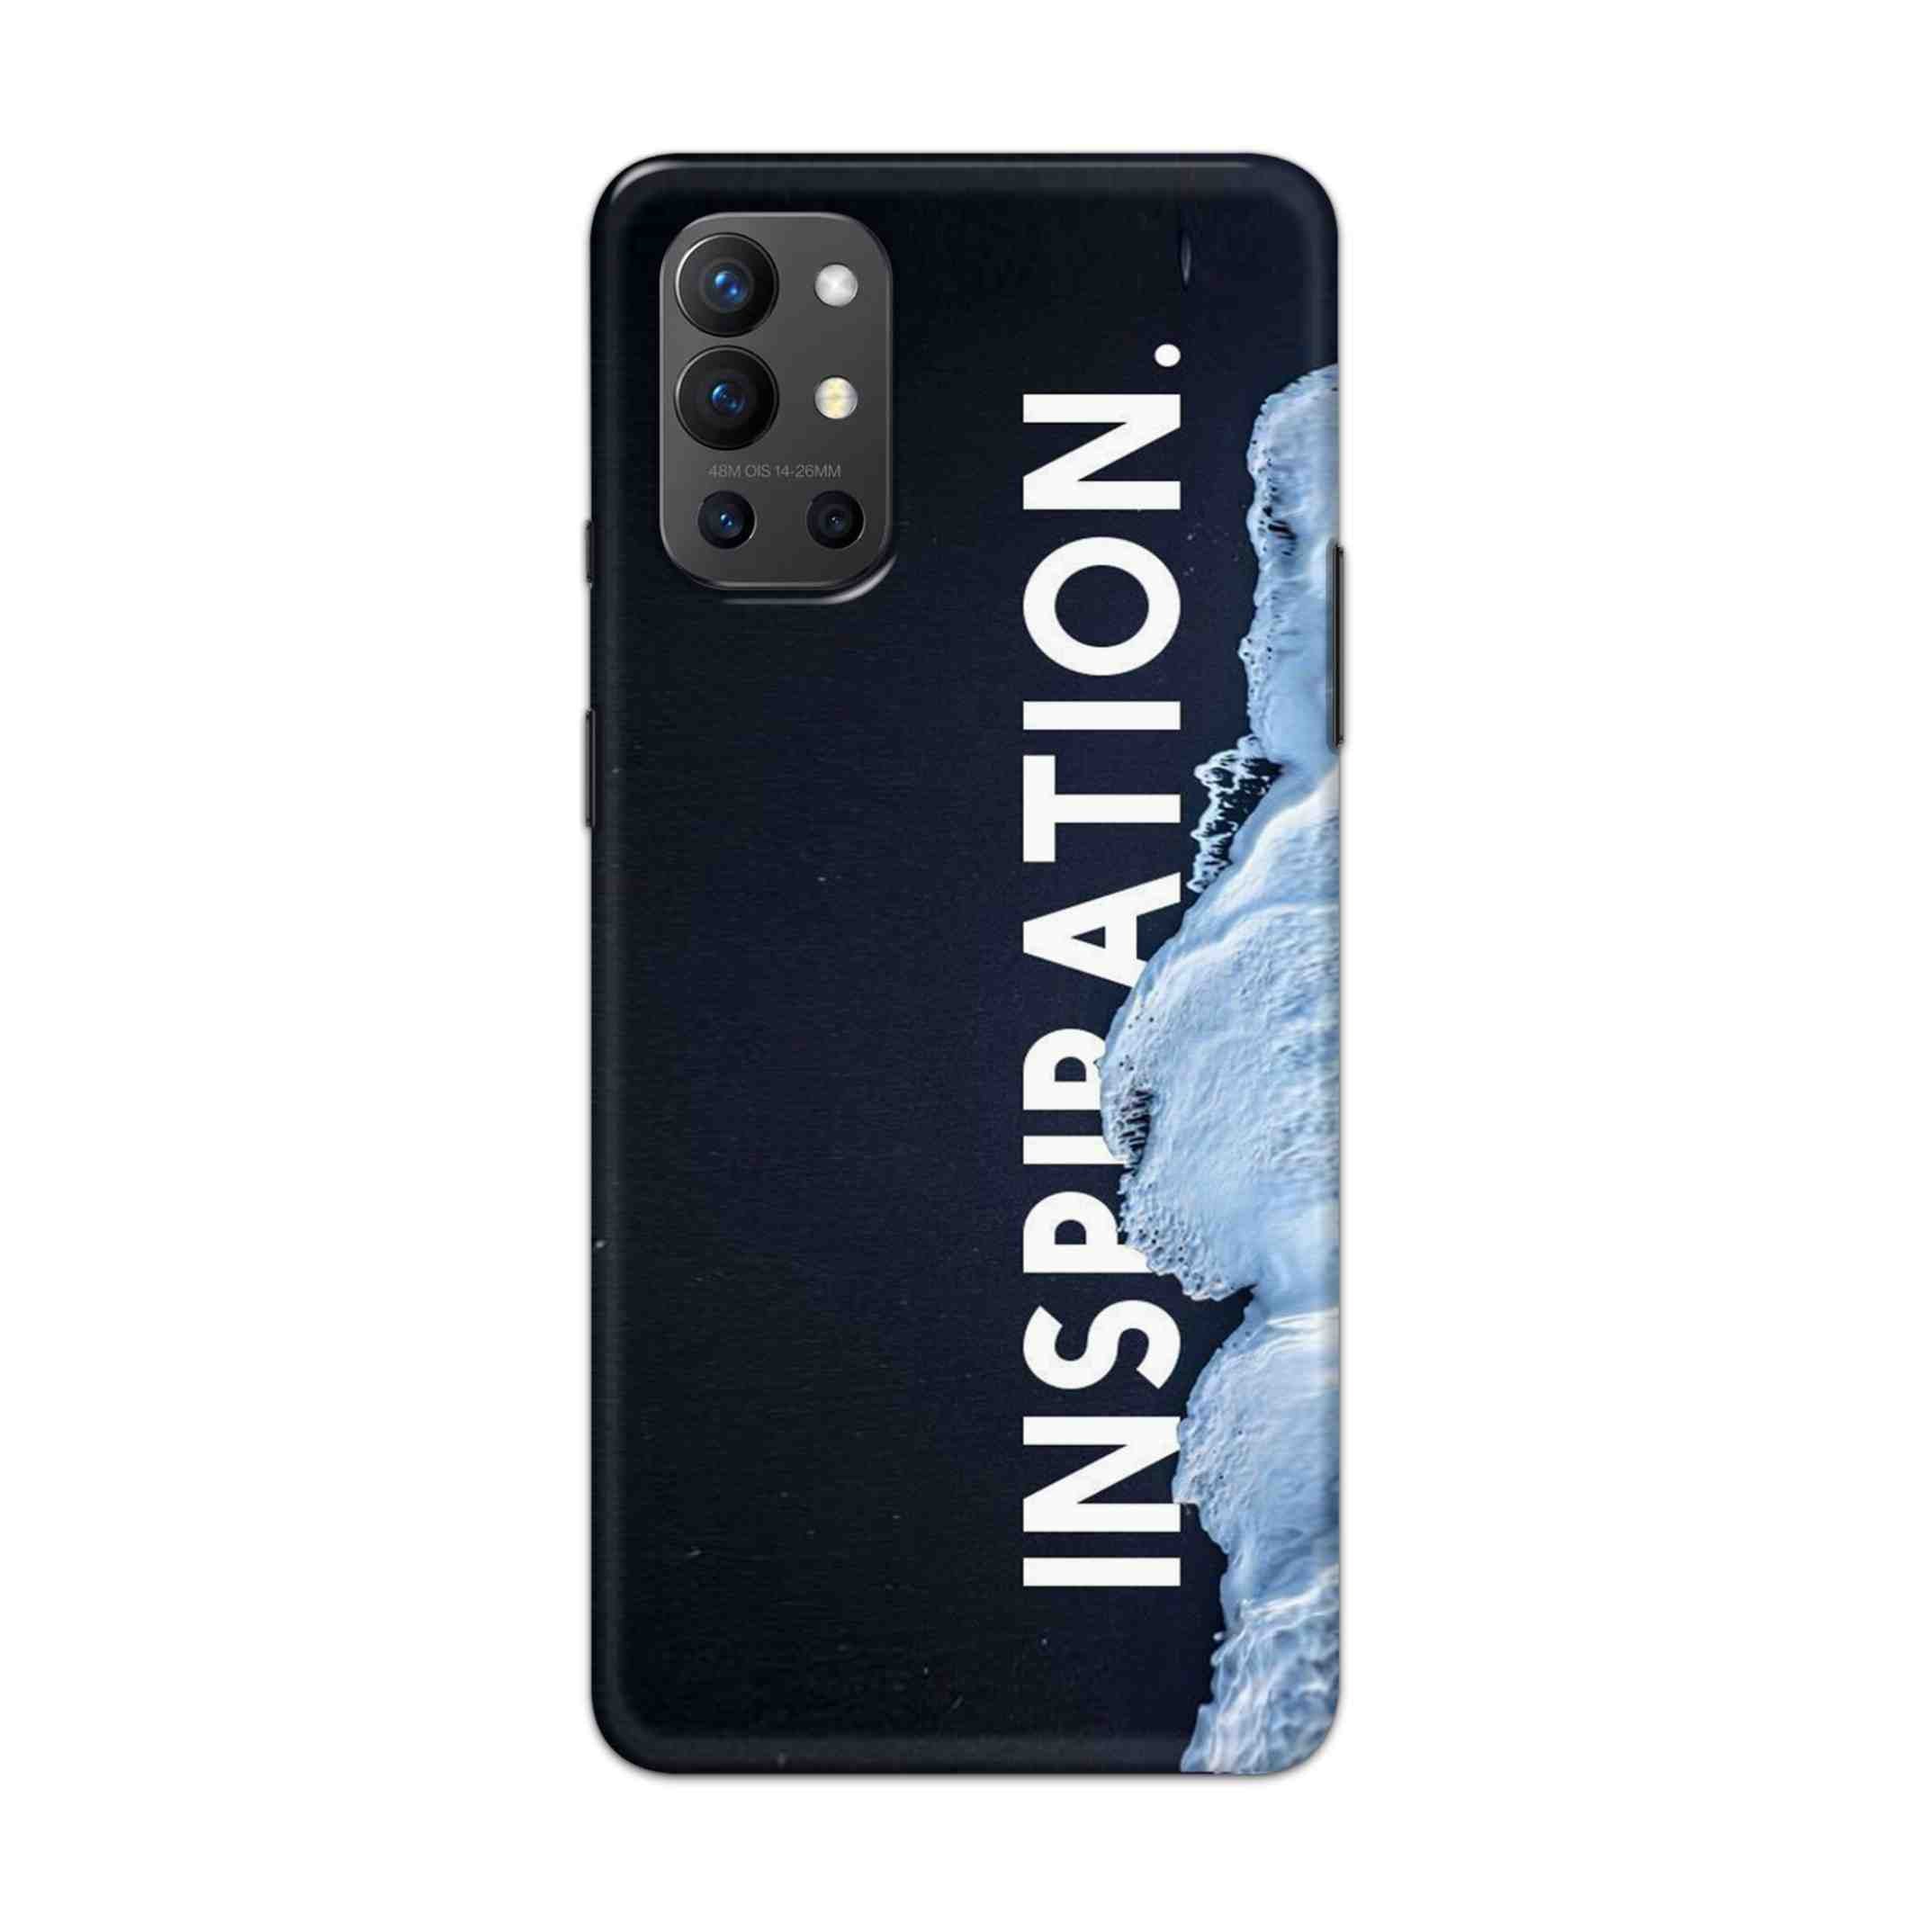 Buy Inspiration Hard Back Mobile Phone Case Cover For OnePlus 9R / 8T Online